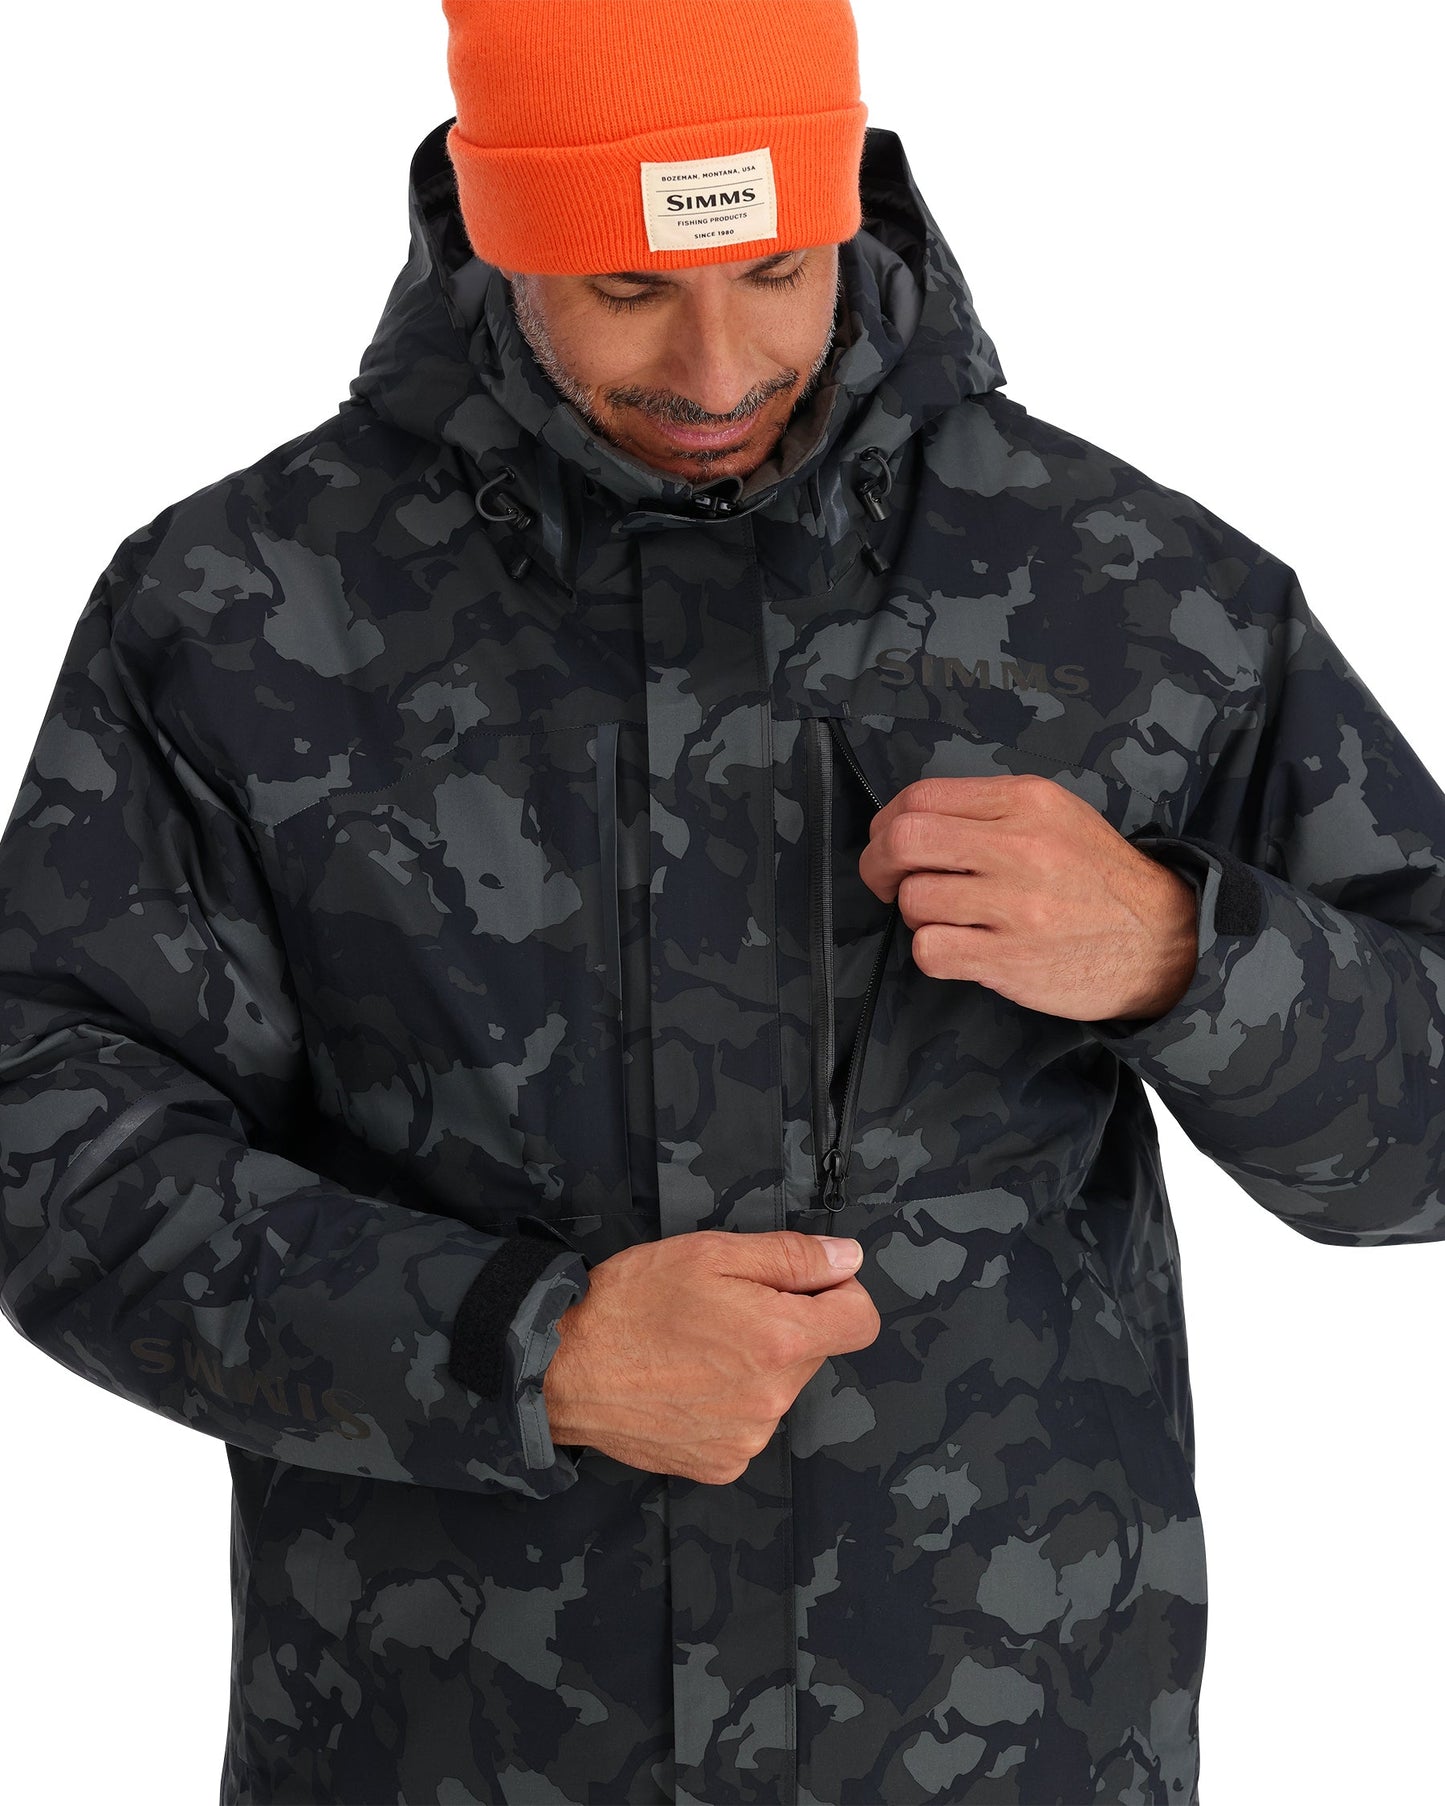 Simms Challenger Jacket Regiment Camo Oliv Drb M M, Categories \ Fly Fishing  Clothing \ Fishing Jackets